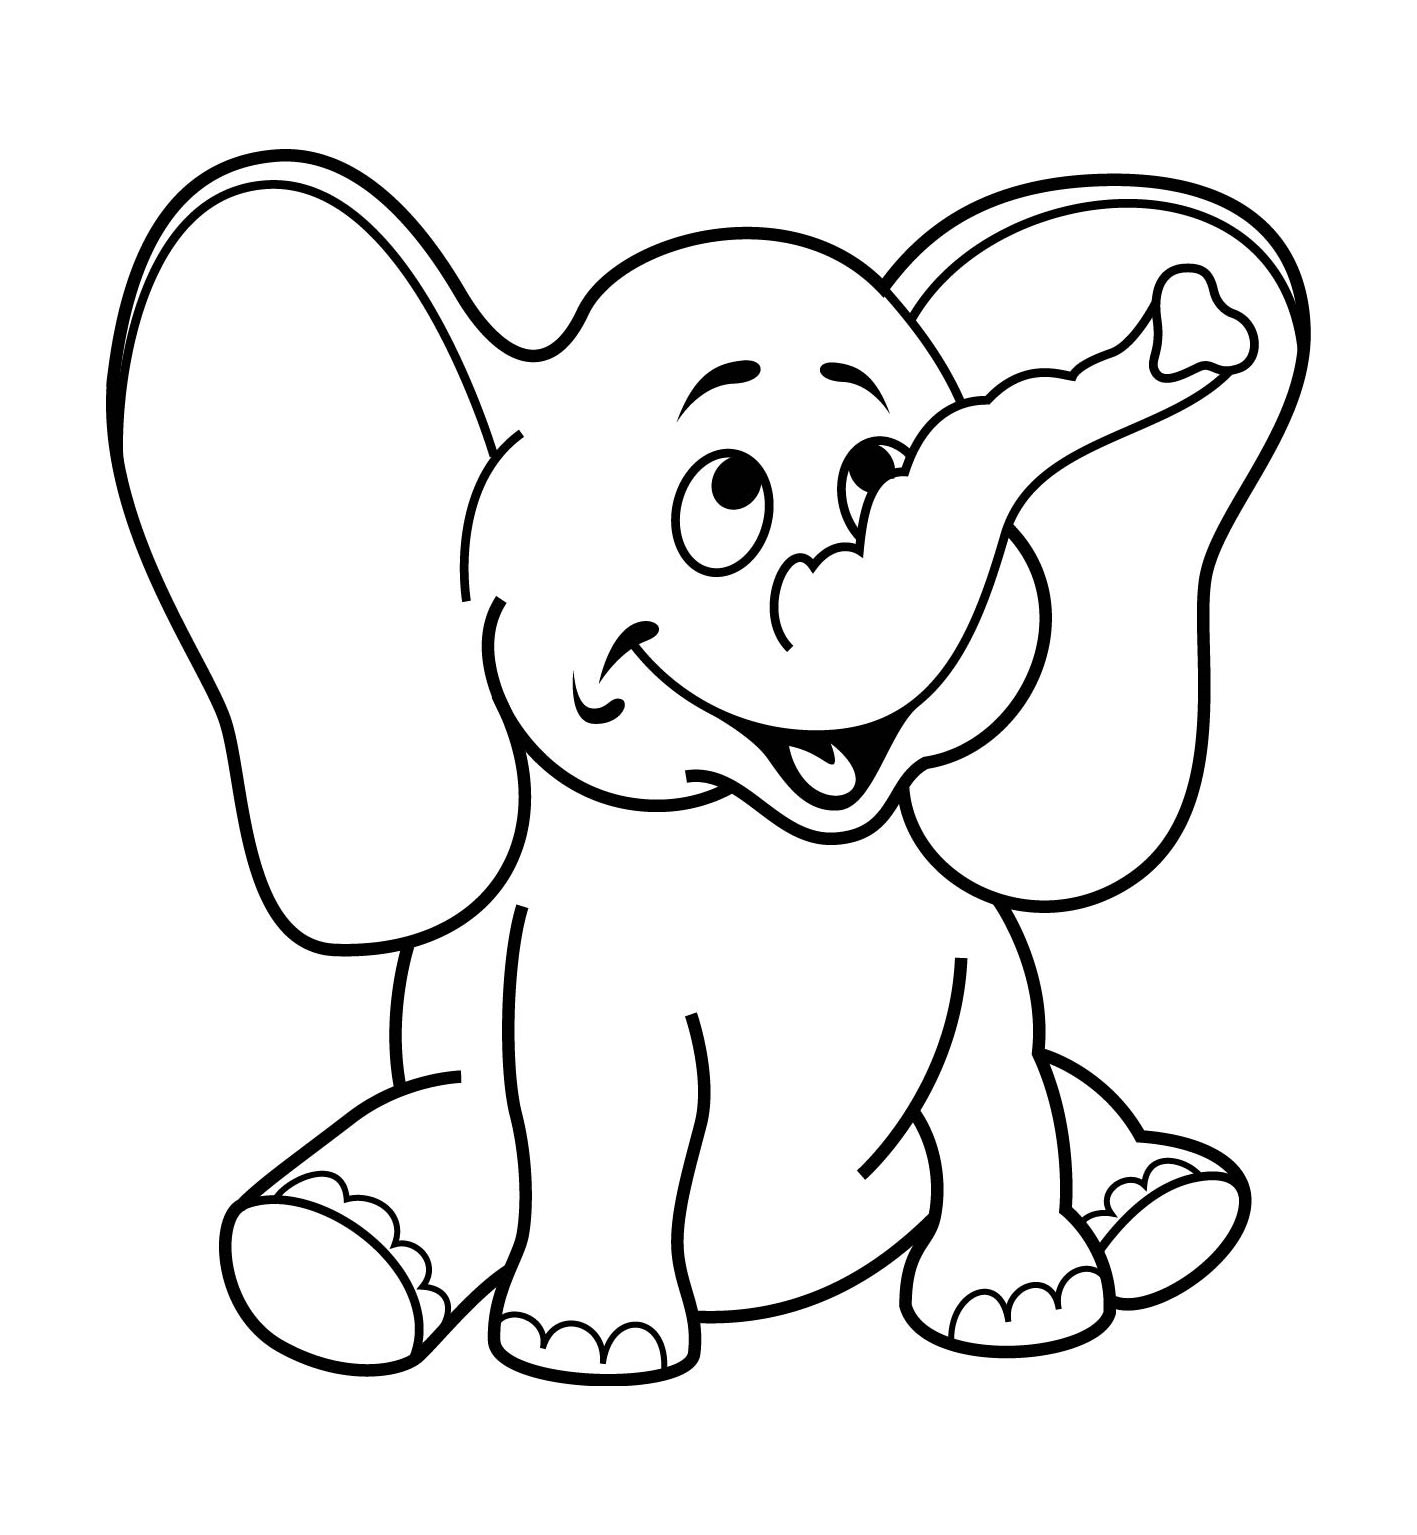 Coloring pages for 3-4 year old girls, 3,4 years, nursery to print for free